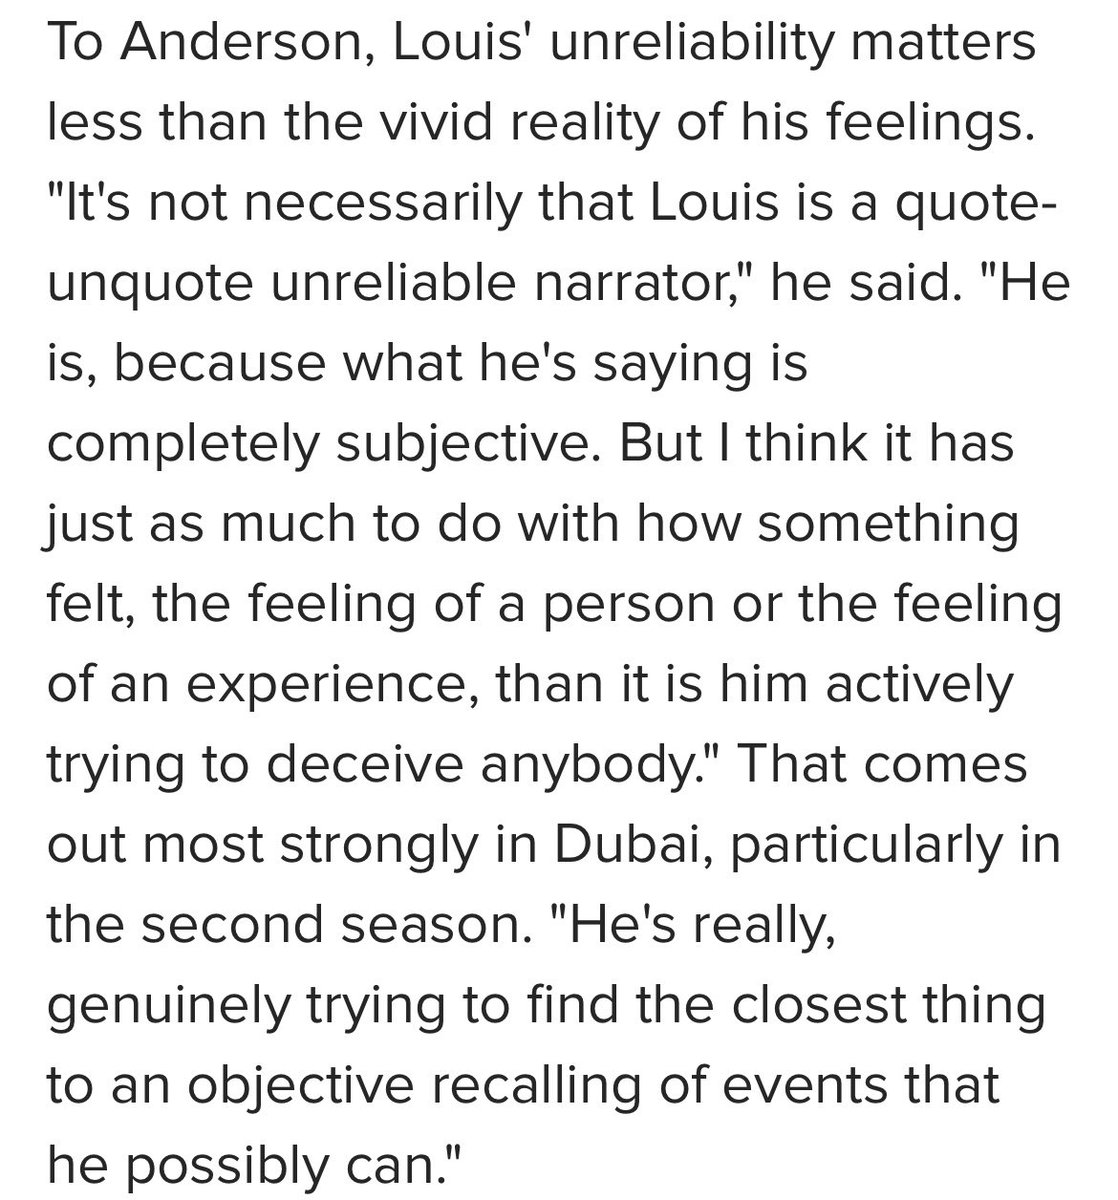 i love them talking about louis’ memory in this way as the unreliable narrator set up is something i really enjoy. it’s never been about louis being a liar, it’s that memories are subjective and impacted by time, trauma and so many other factors